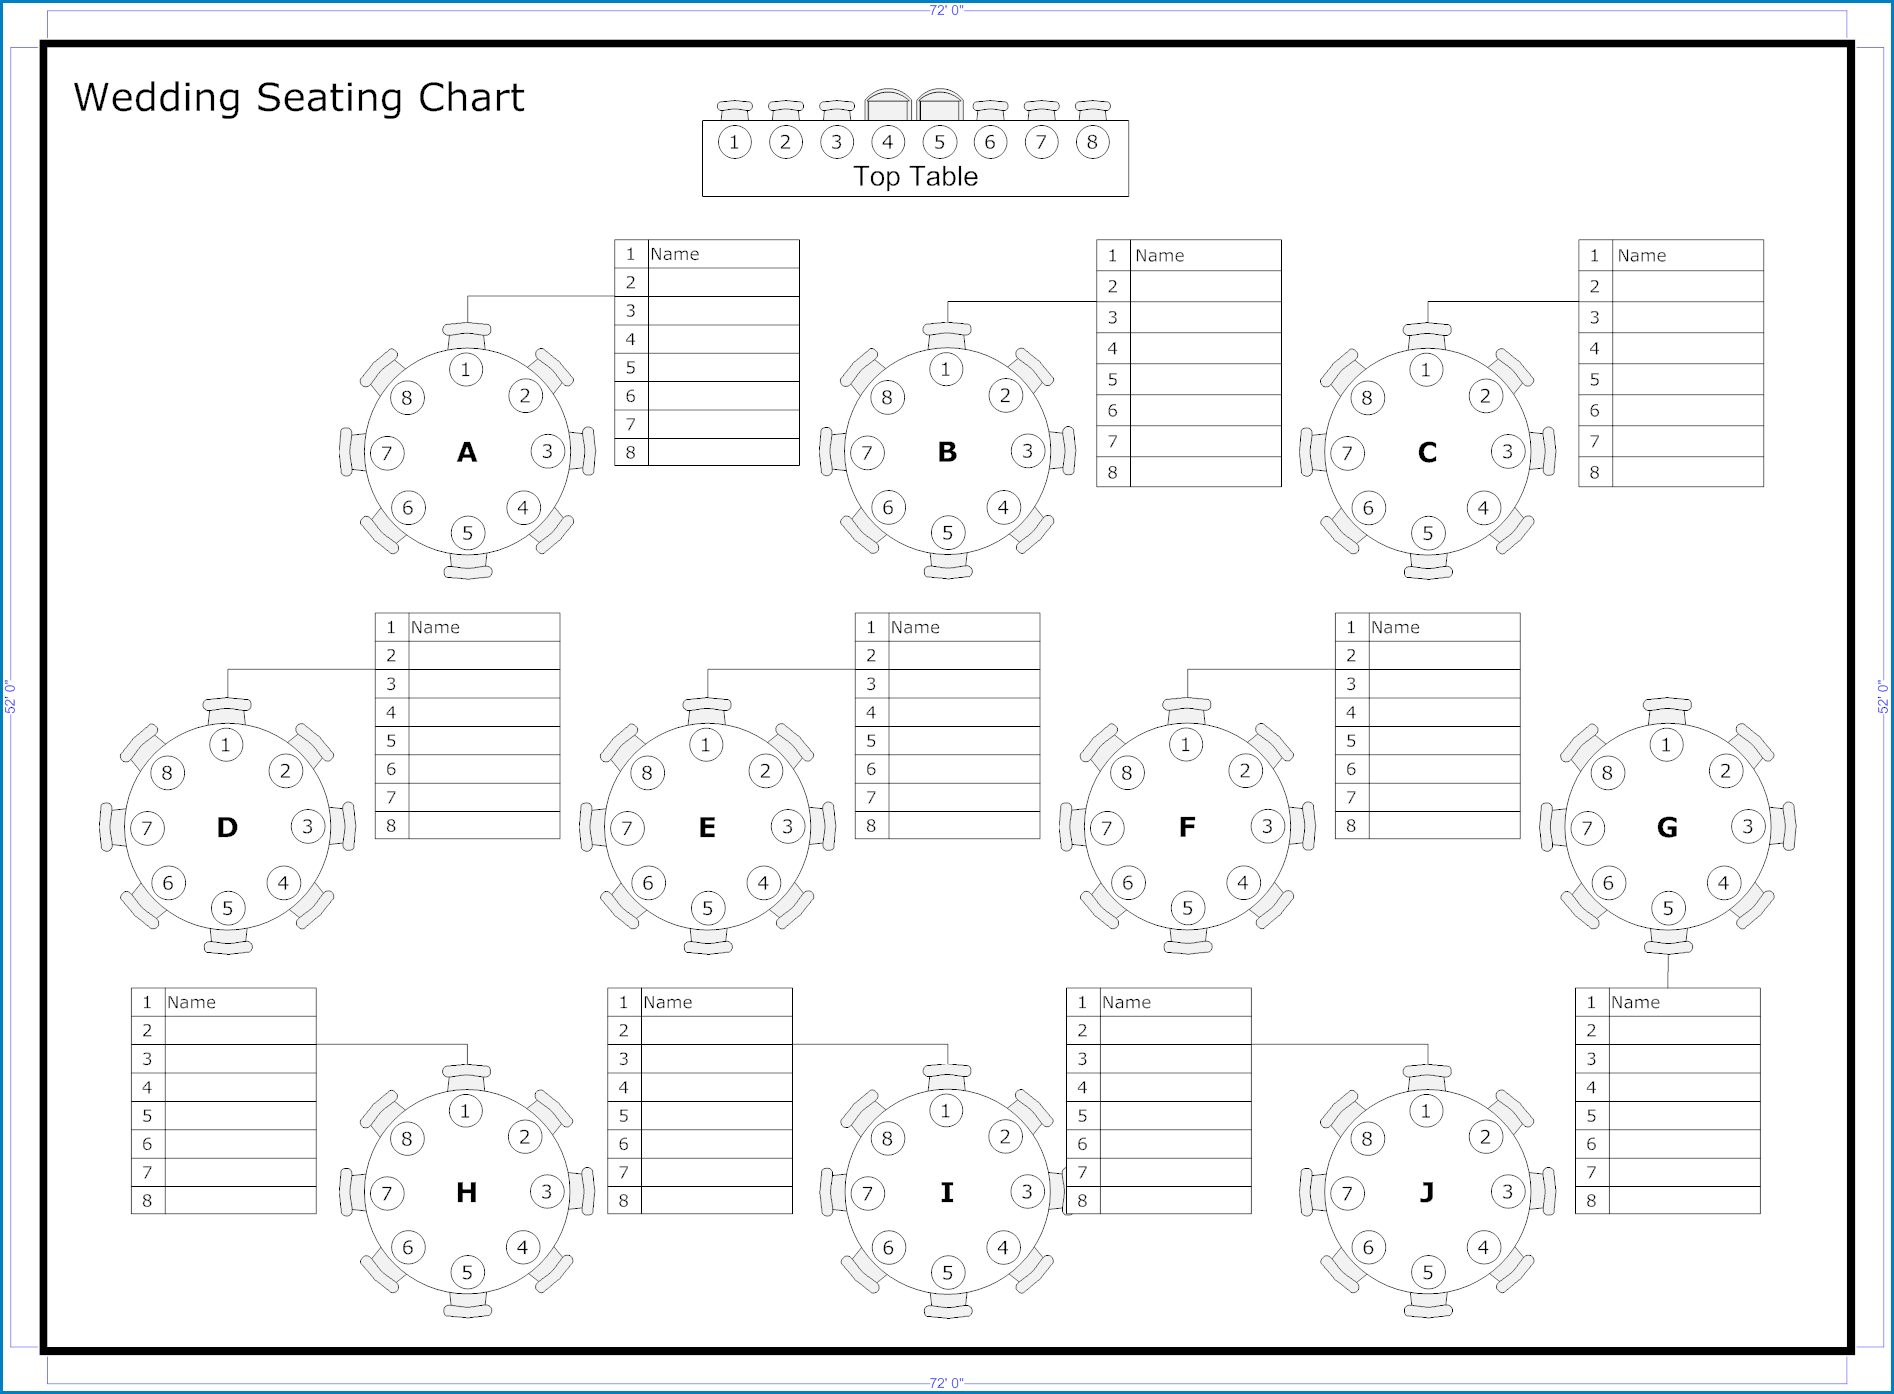 Example of Wedding Seating Chart Template